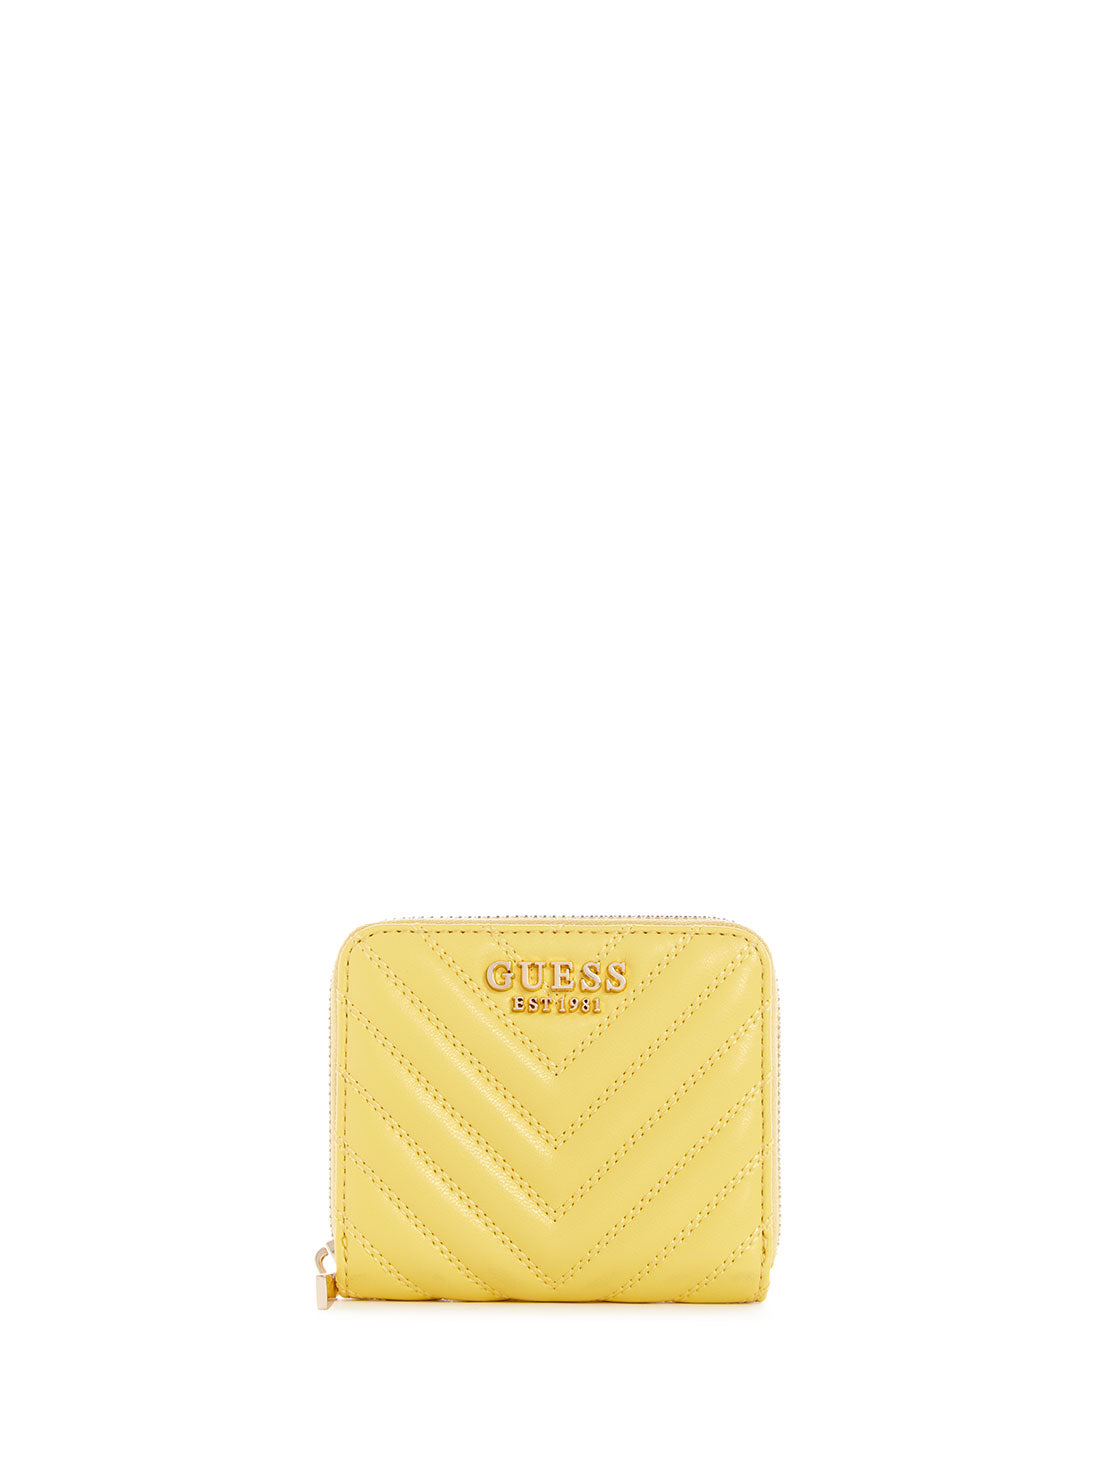 GUESS Women's Yellow Keillah Quilted Small Wallet QG869037 Front View